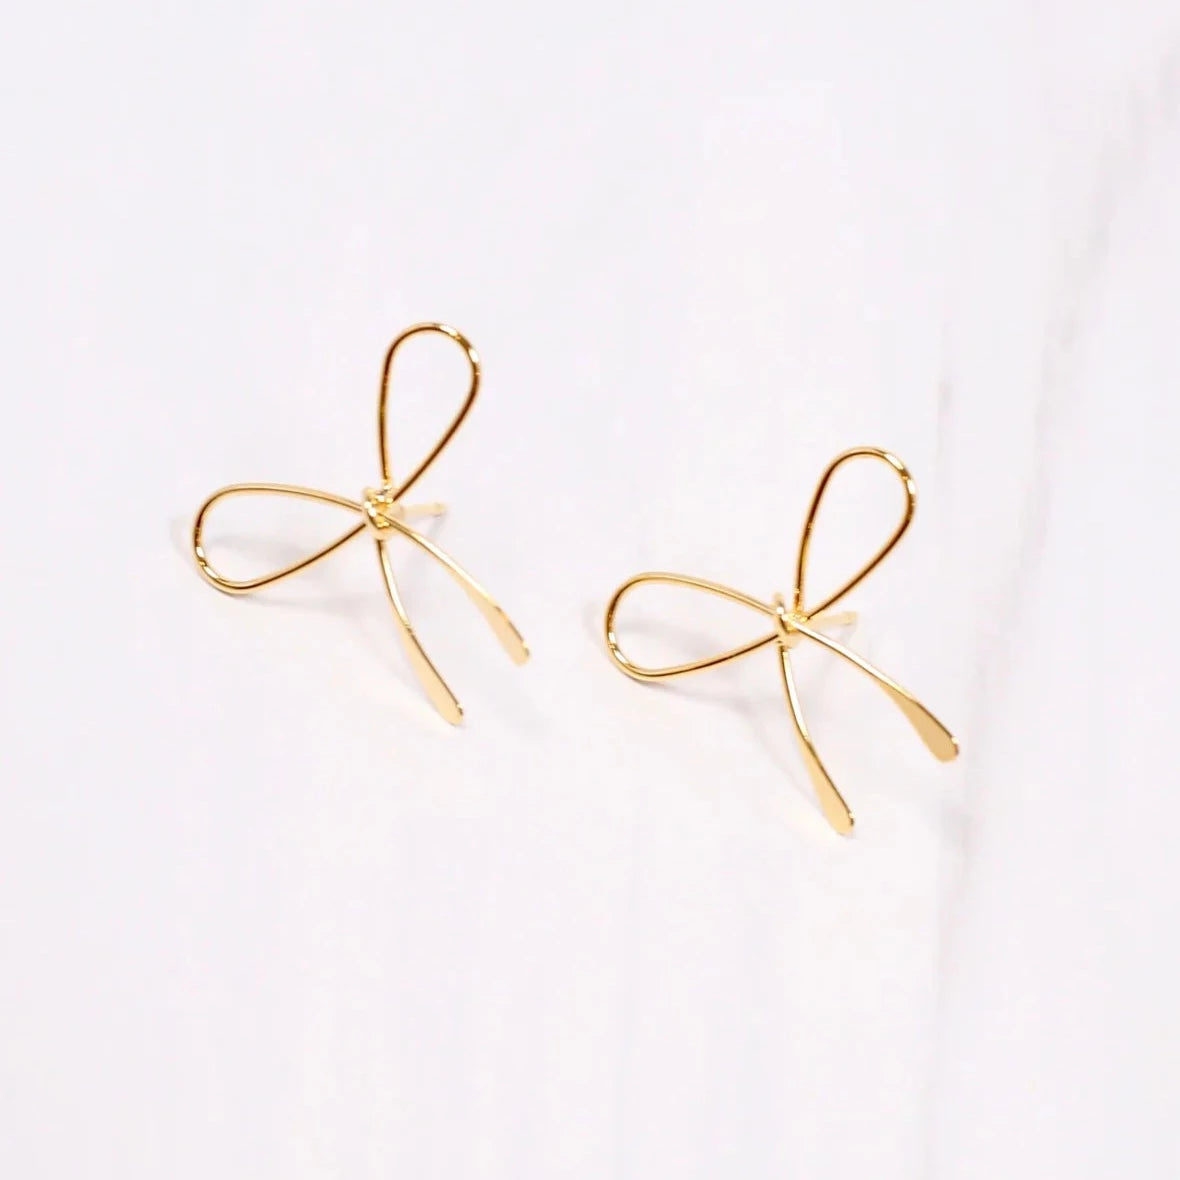 Rowena Bow Earrings Gold-Earrings-Caroline Hill-LouisGeorge Boutique, Women’s Fashion Boutique Located in Trussville, Alabama